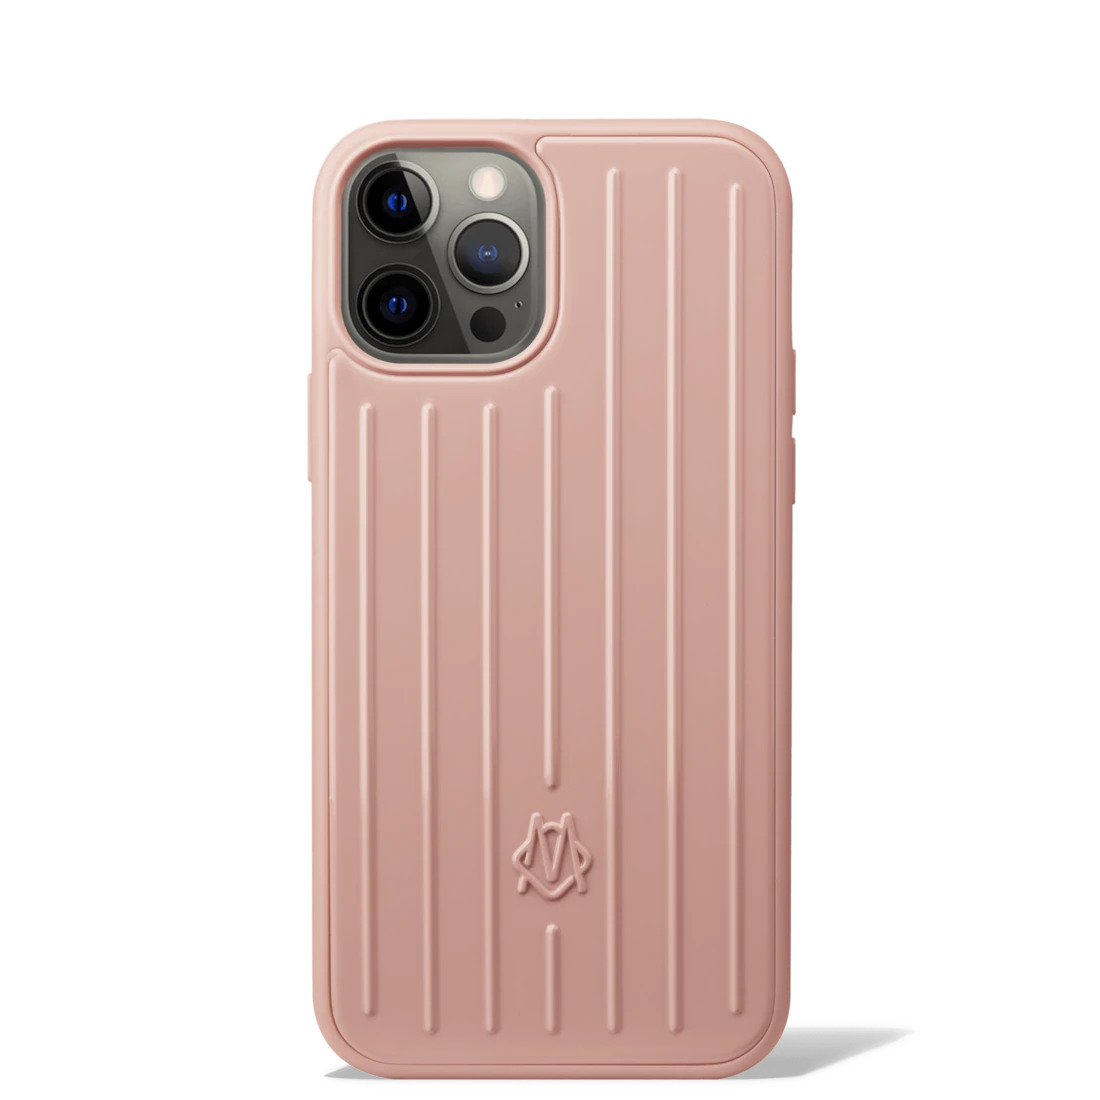 iPhone Accessories Desert Rose Pink Case for iPhone 12 & 12 Pro - 1